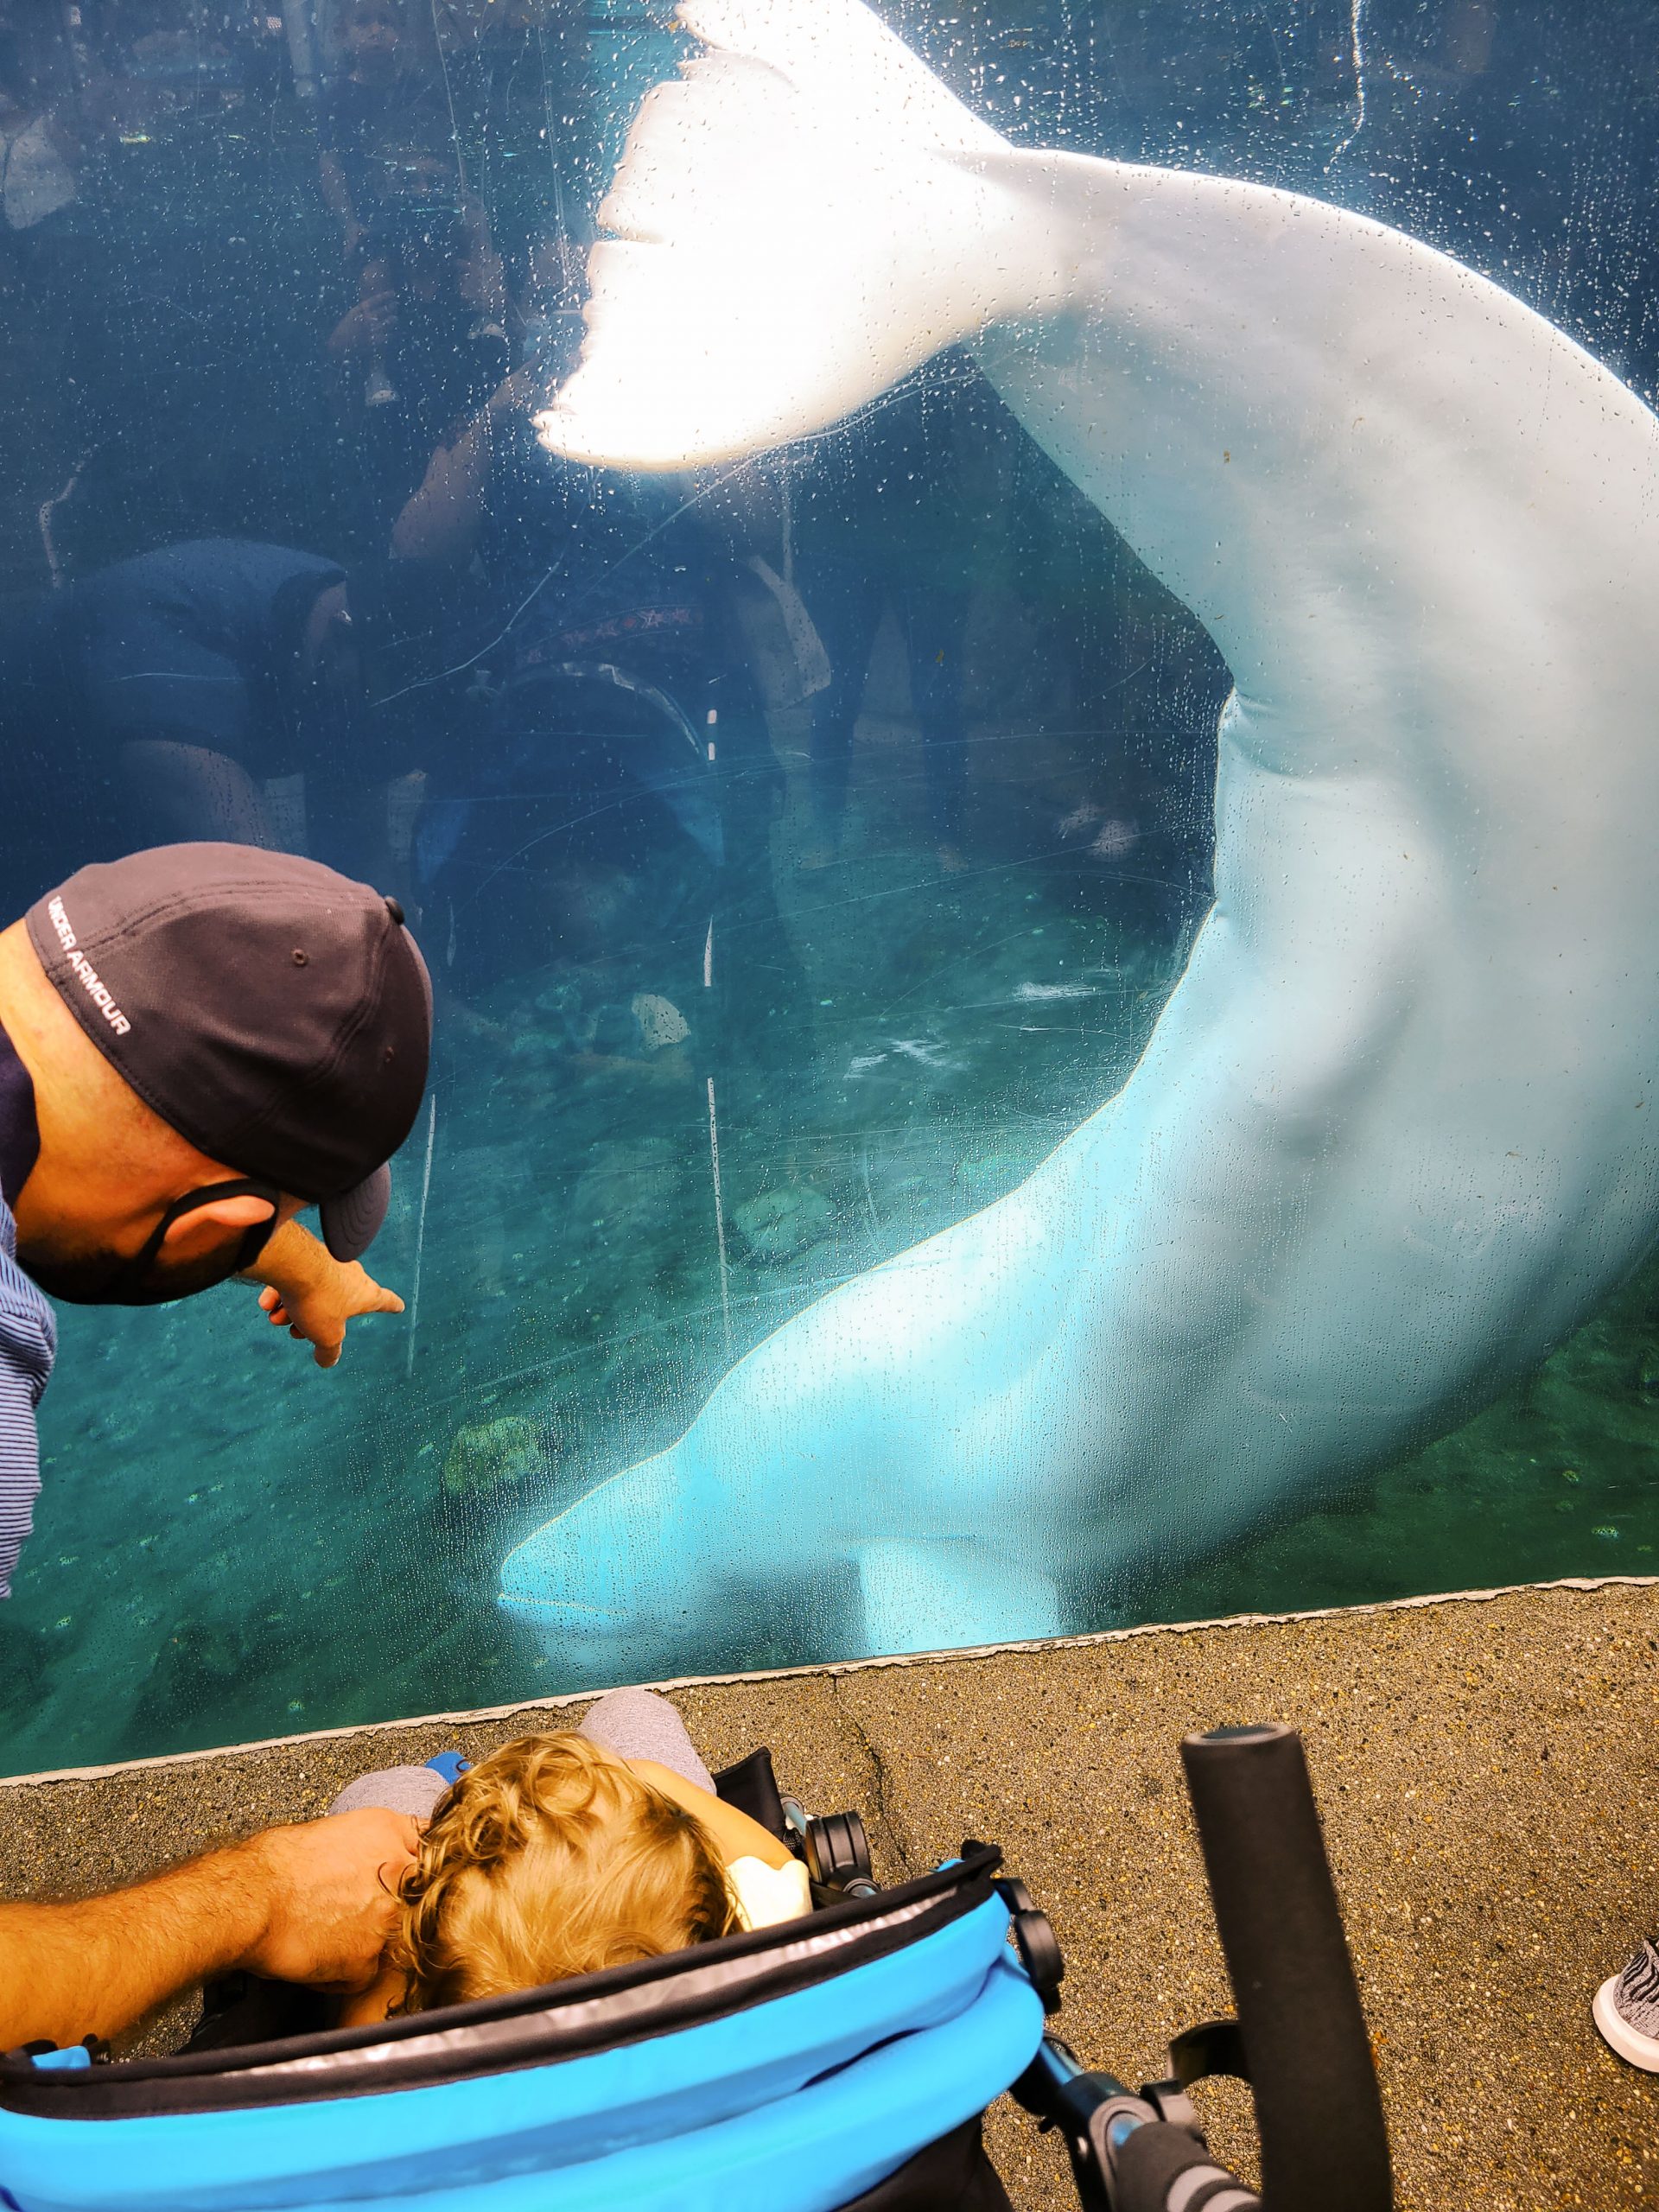 A man and child in a stroller watching a whale behind a pane of glass at the aquarium in Mystic, Connecticut